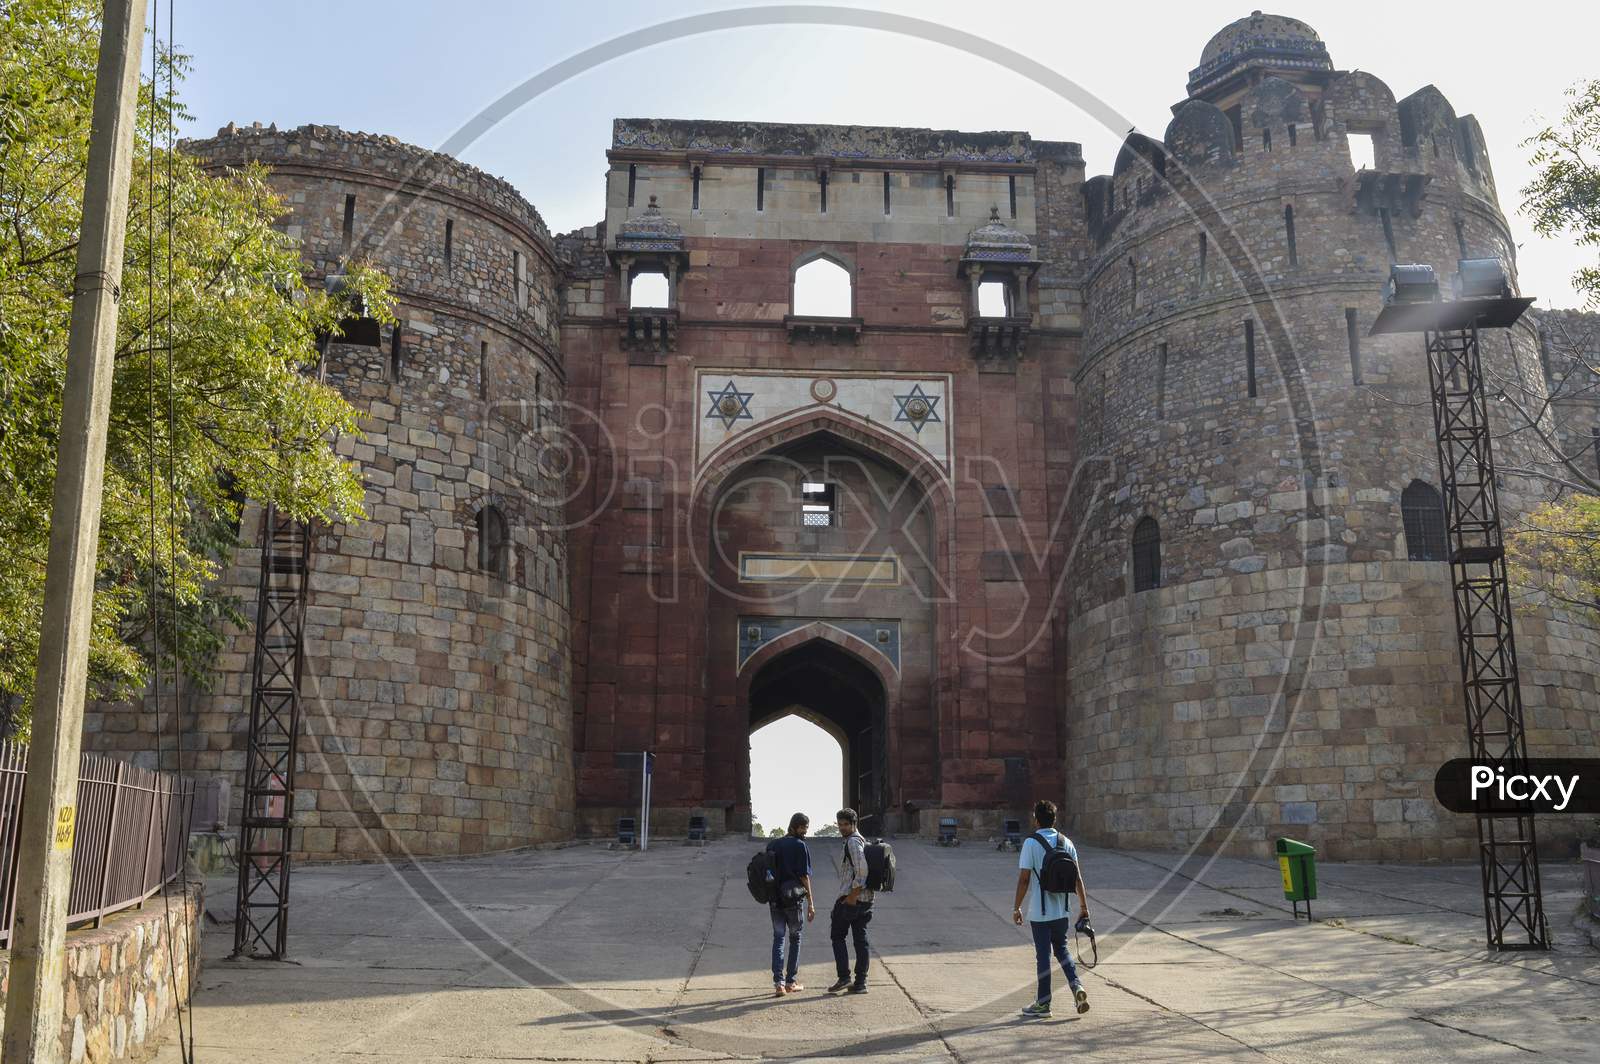 A View Of Main Gate Of Old Fort From Outside.